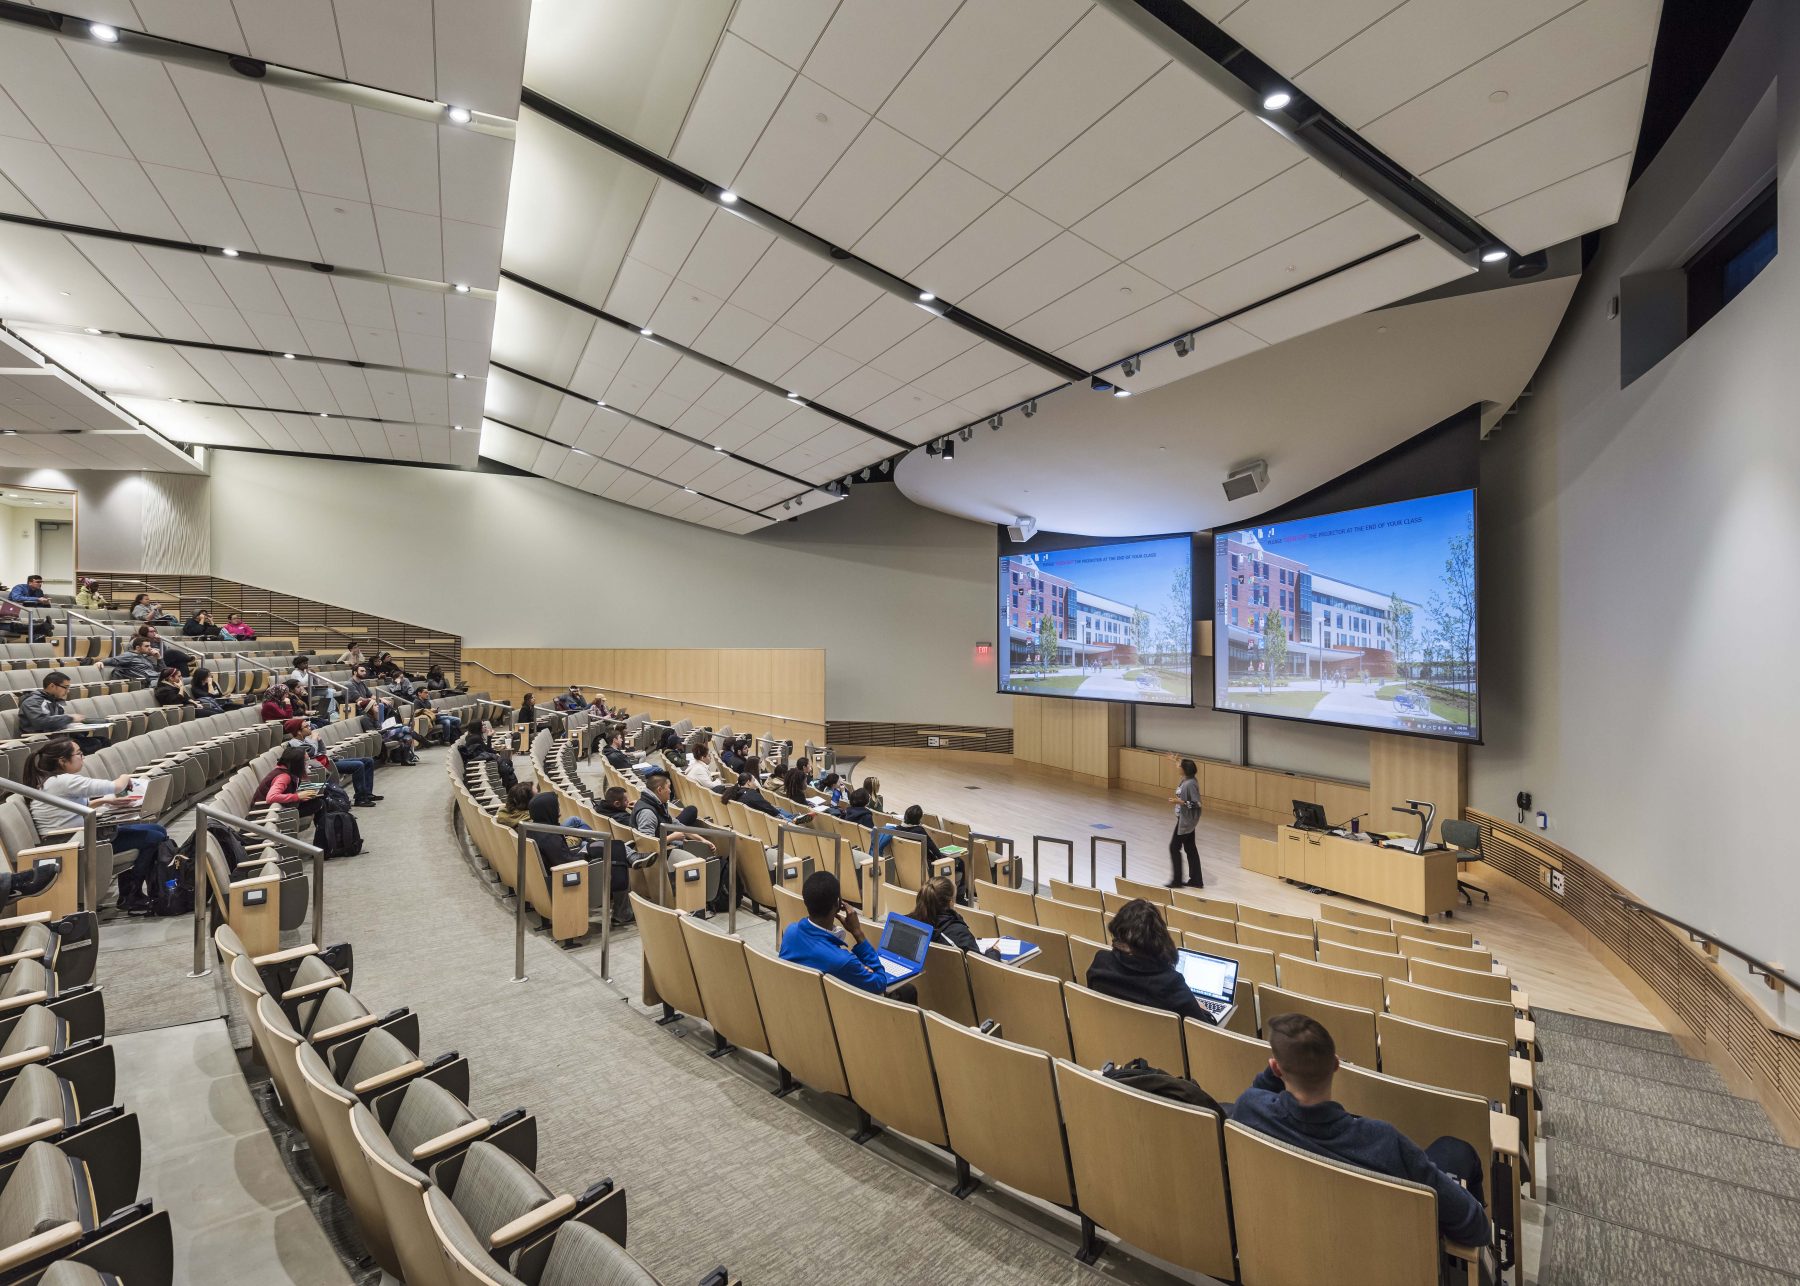 University Hall, University of Massachusetts Boston Higher Education Lecture Hall with two projector screens and plenty of seating.